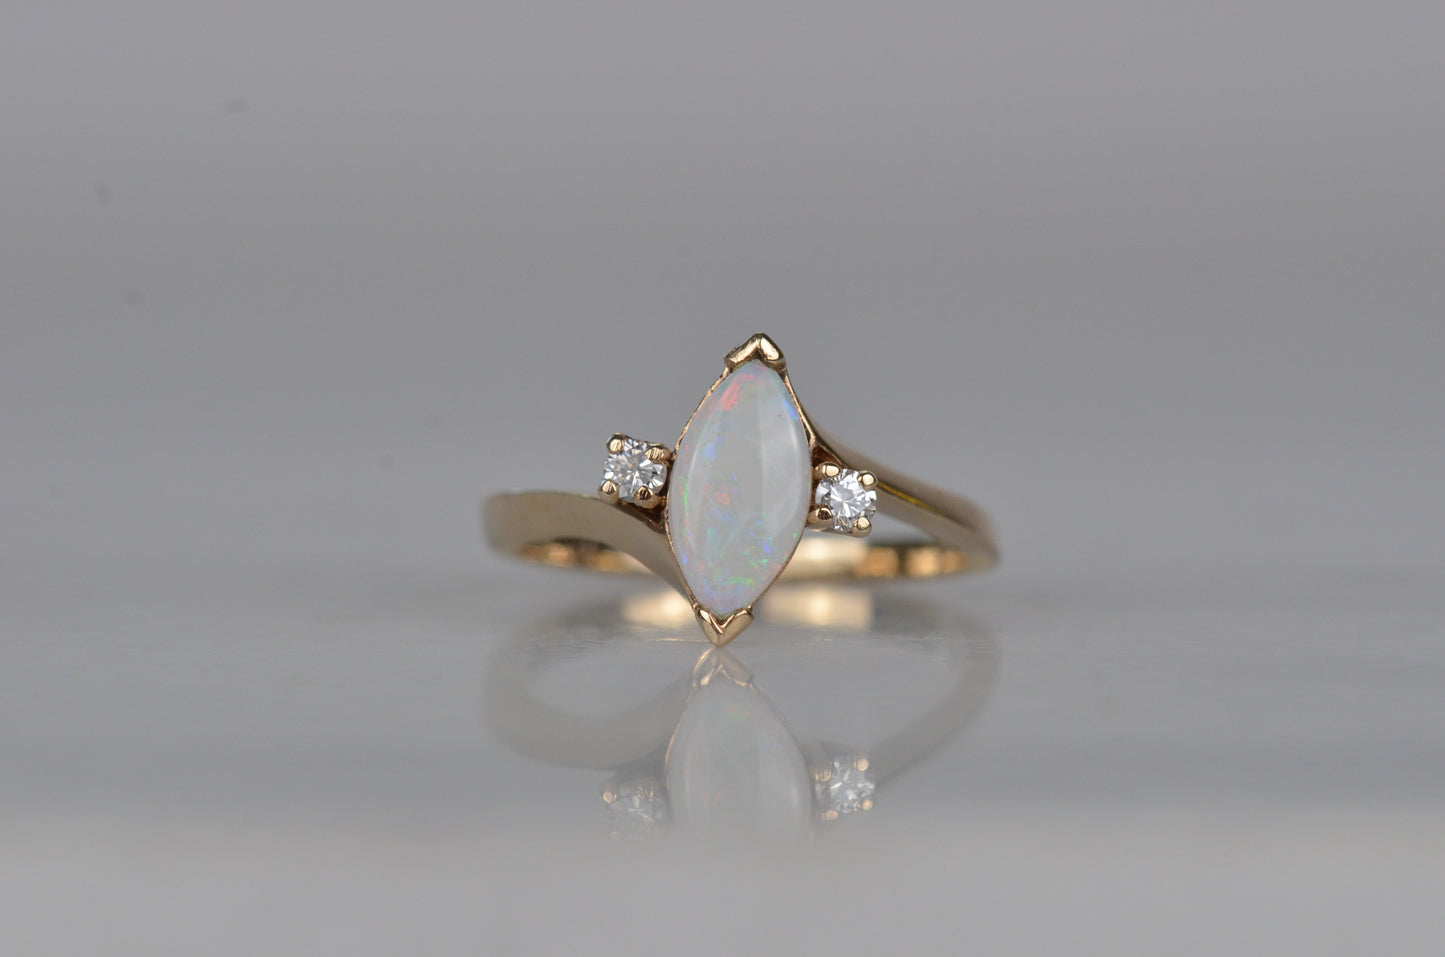 Dreamy Vintage Marquise Opal Trilogy Ring